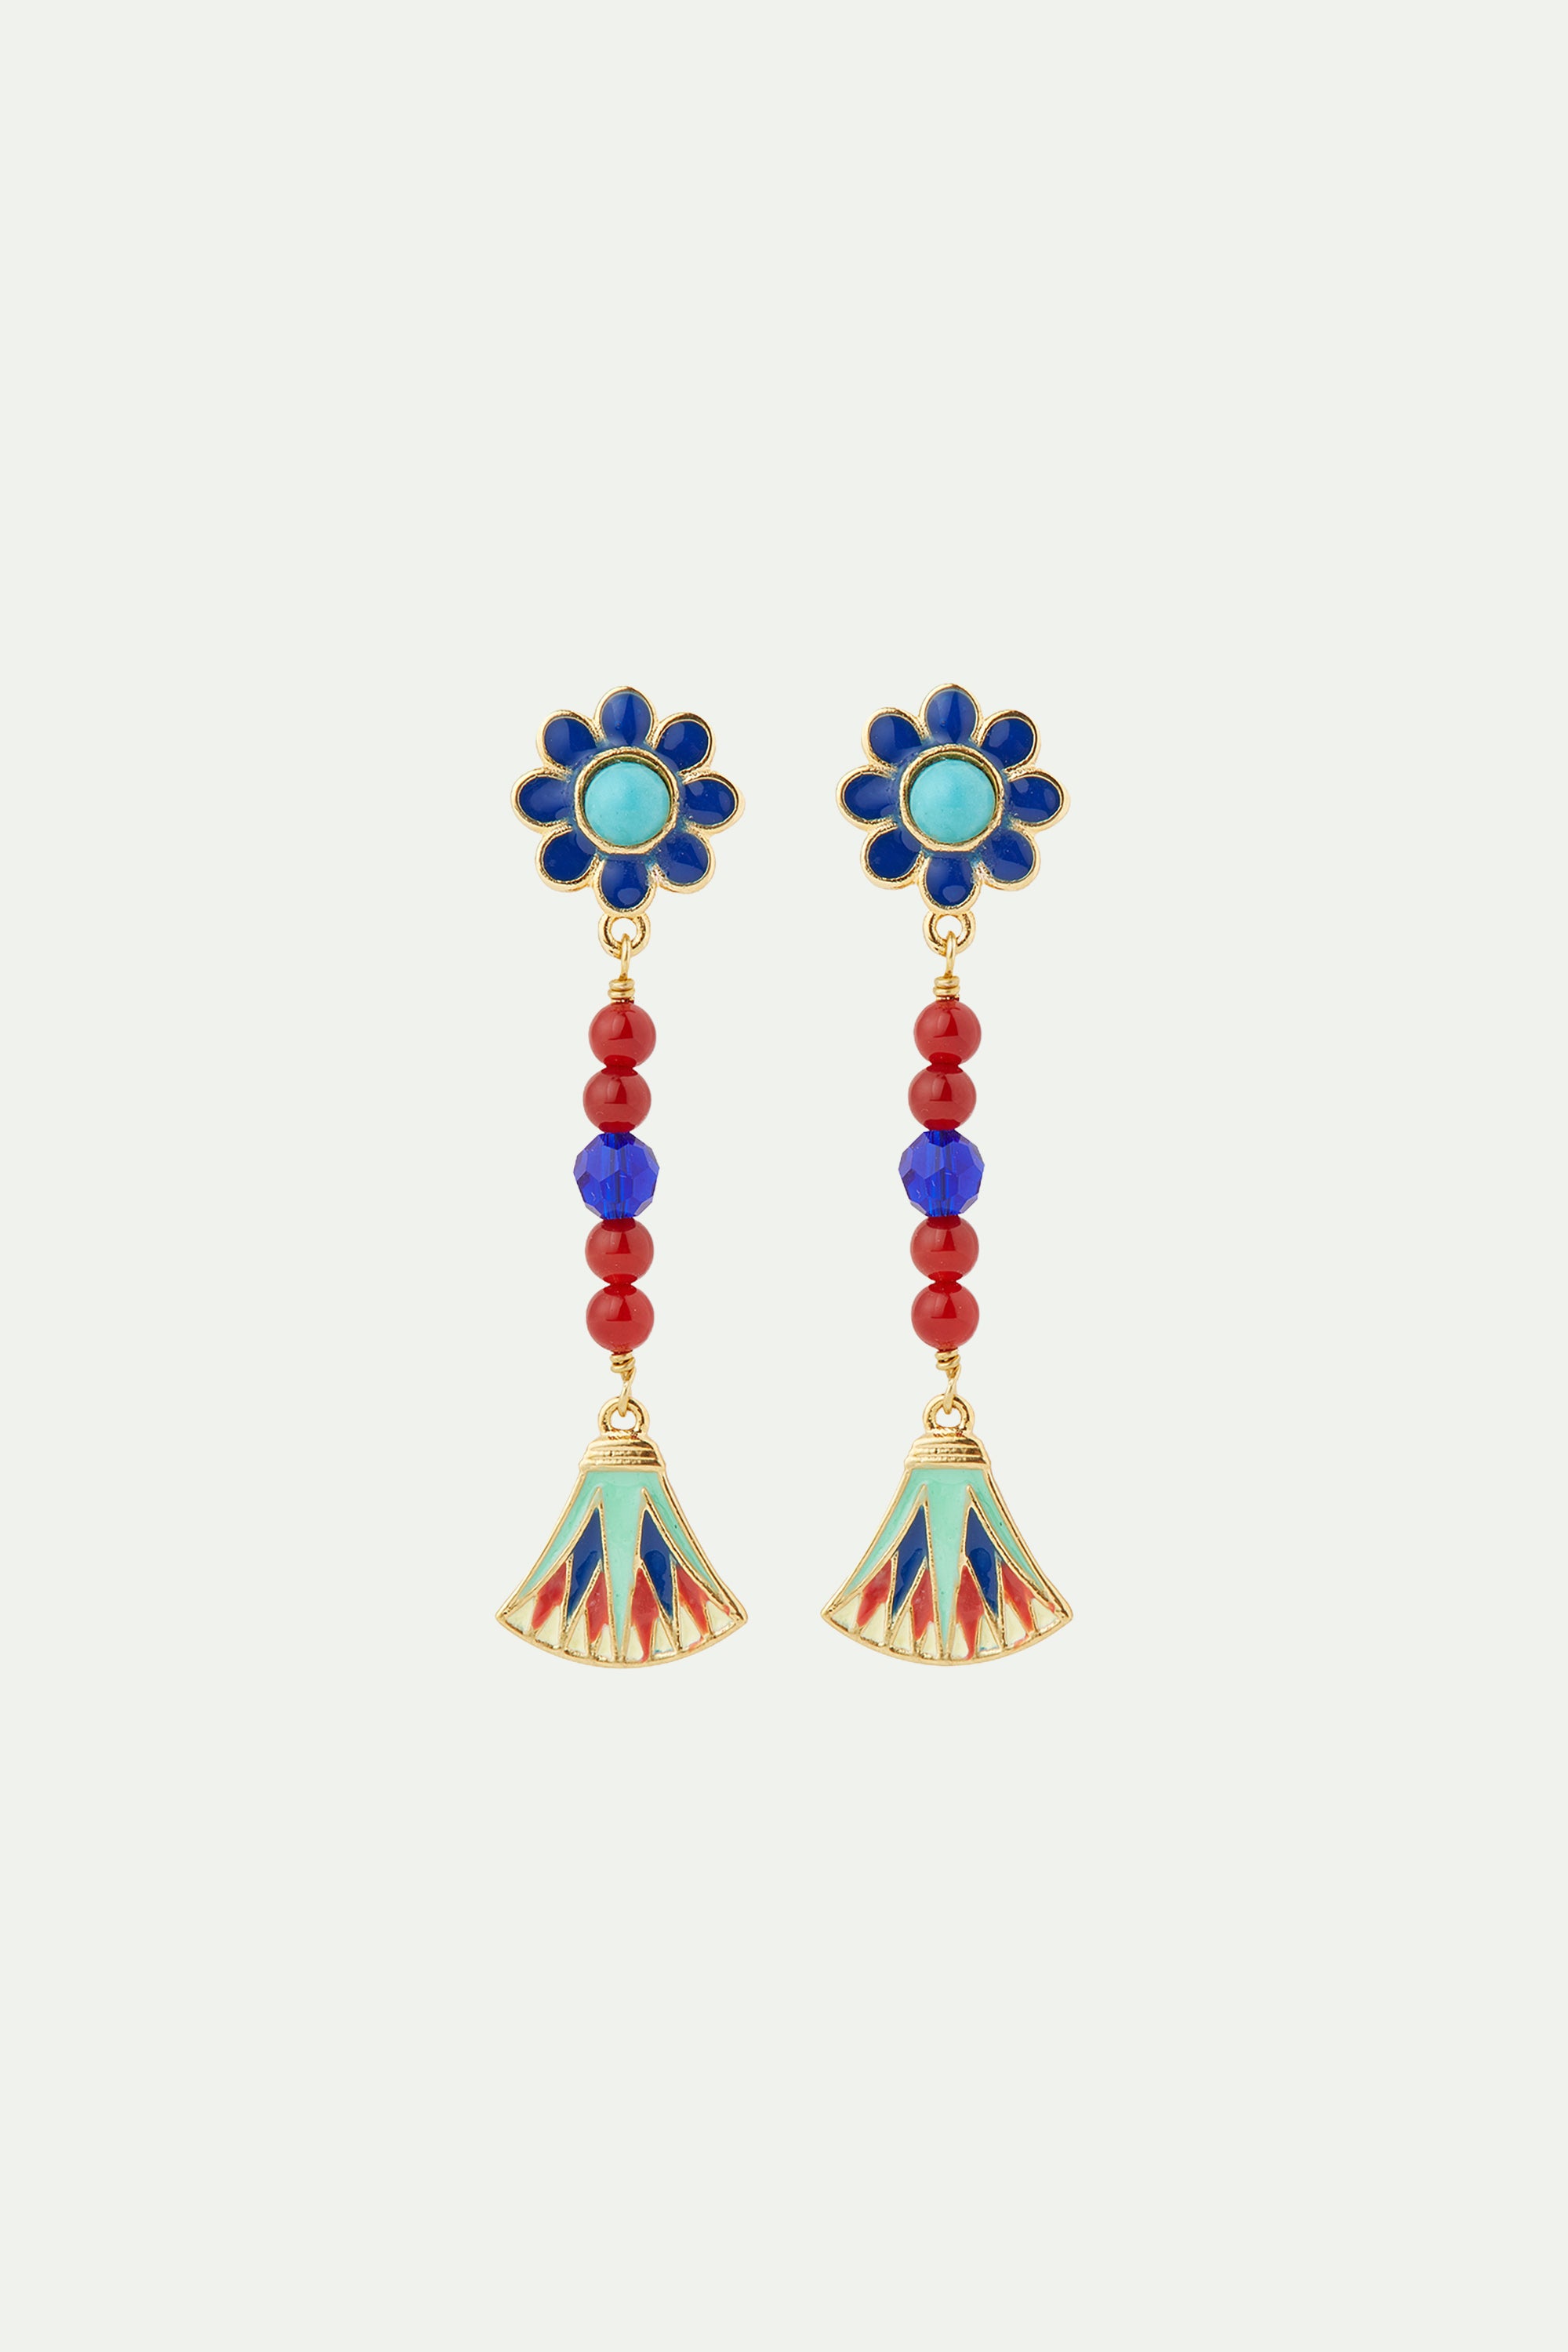 Mystery of the Nile post earrings